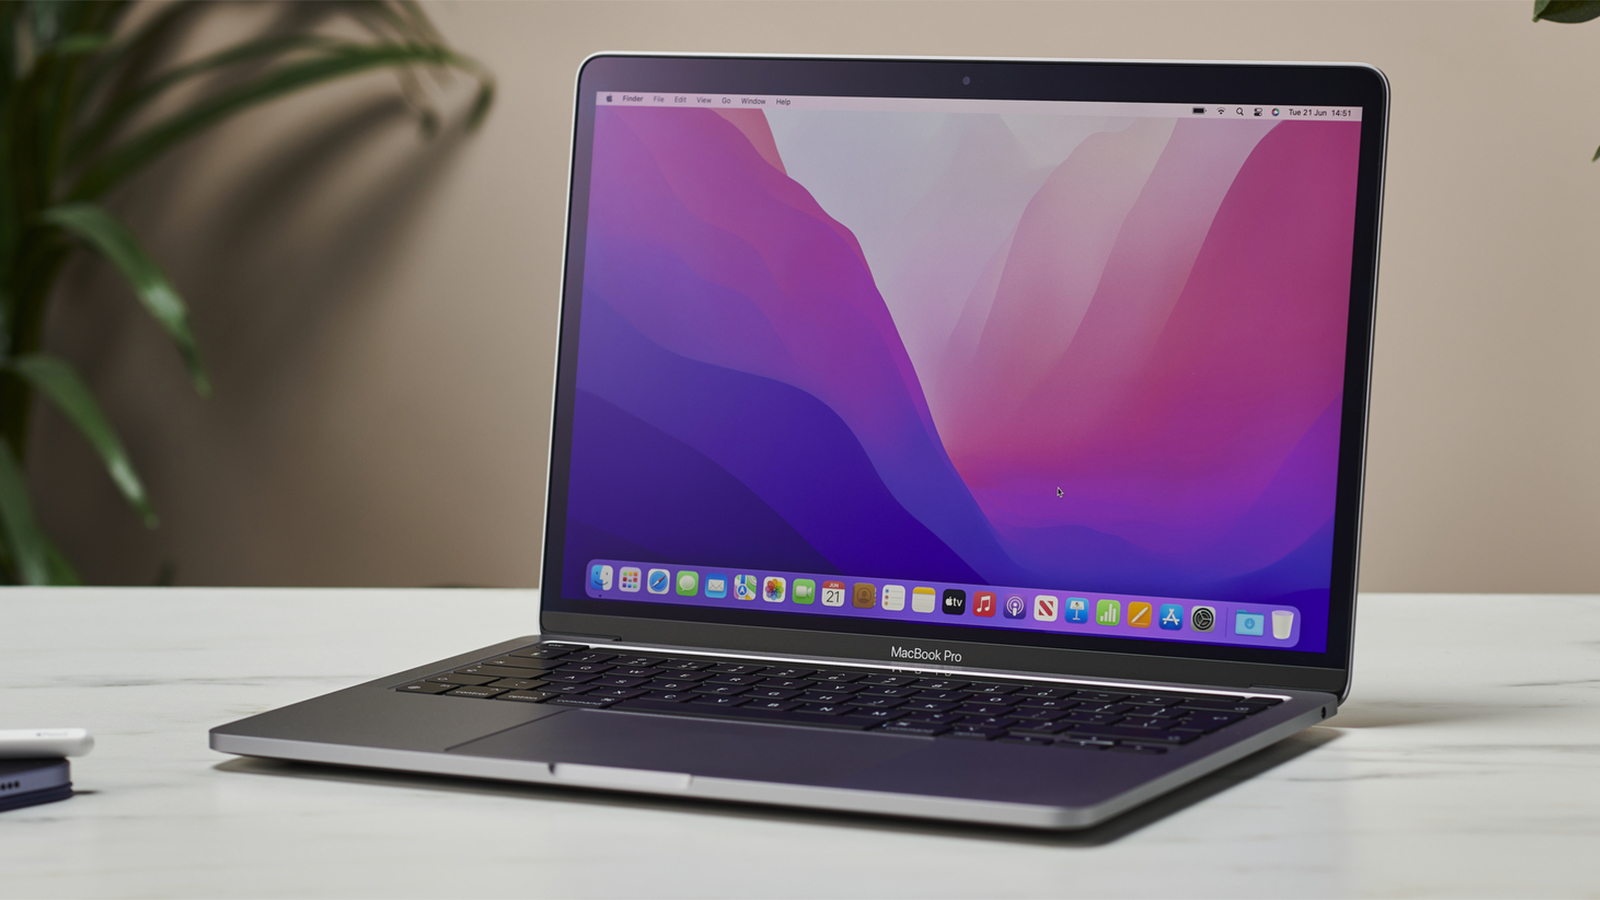 The MacBook Pro 13-inch M2 2022 laptop unfolded and facing forward